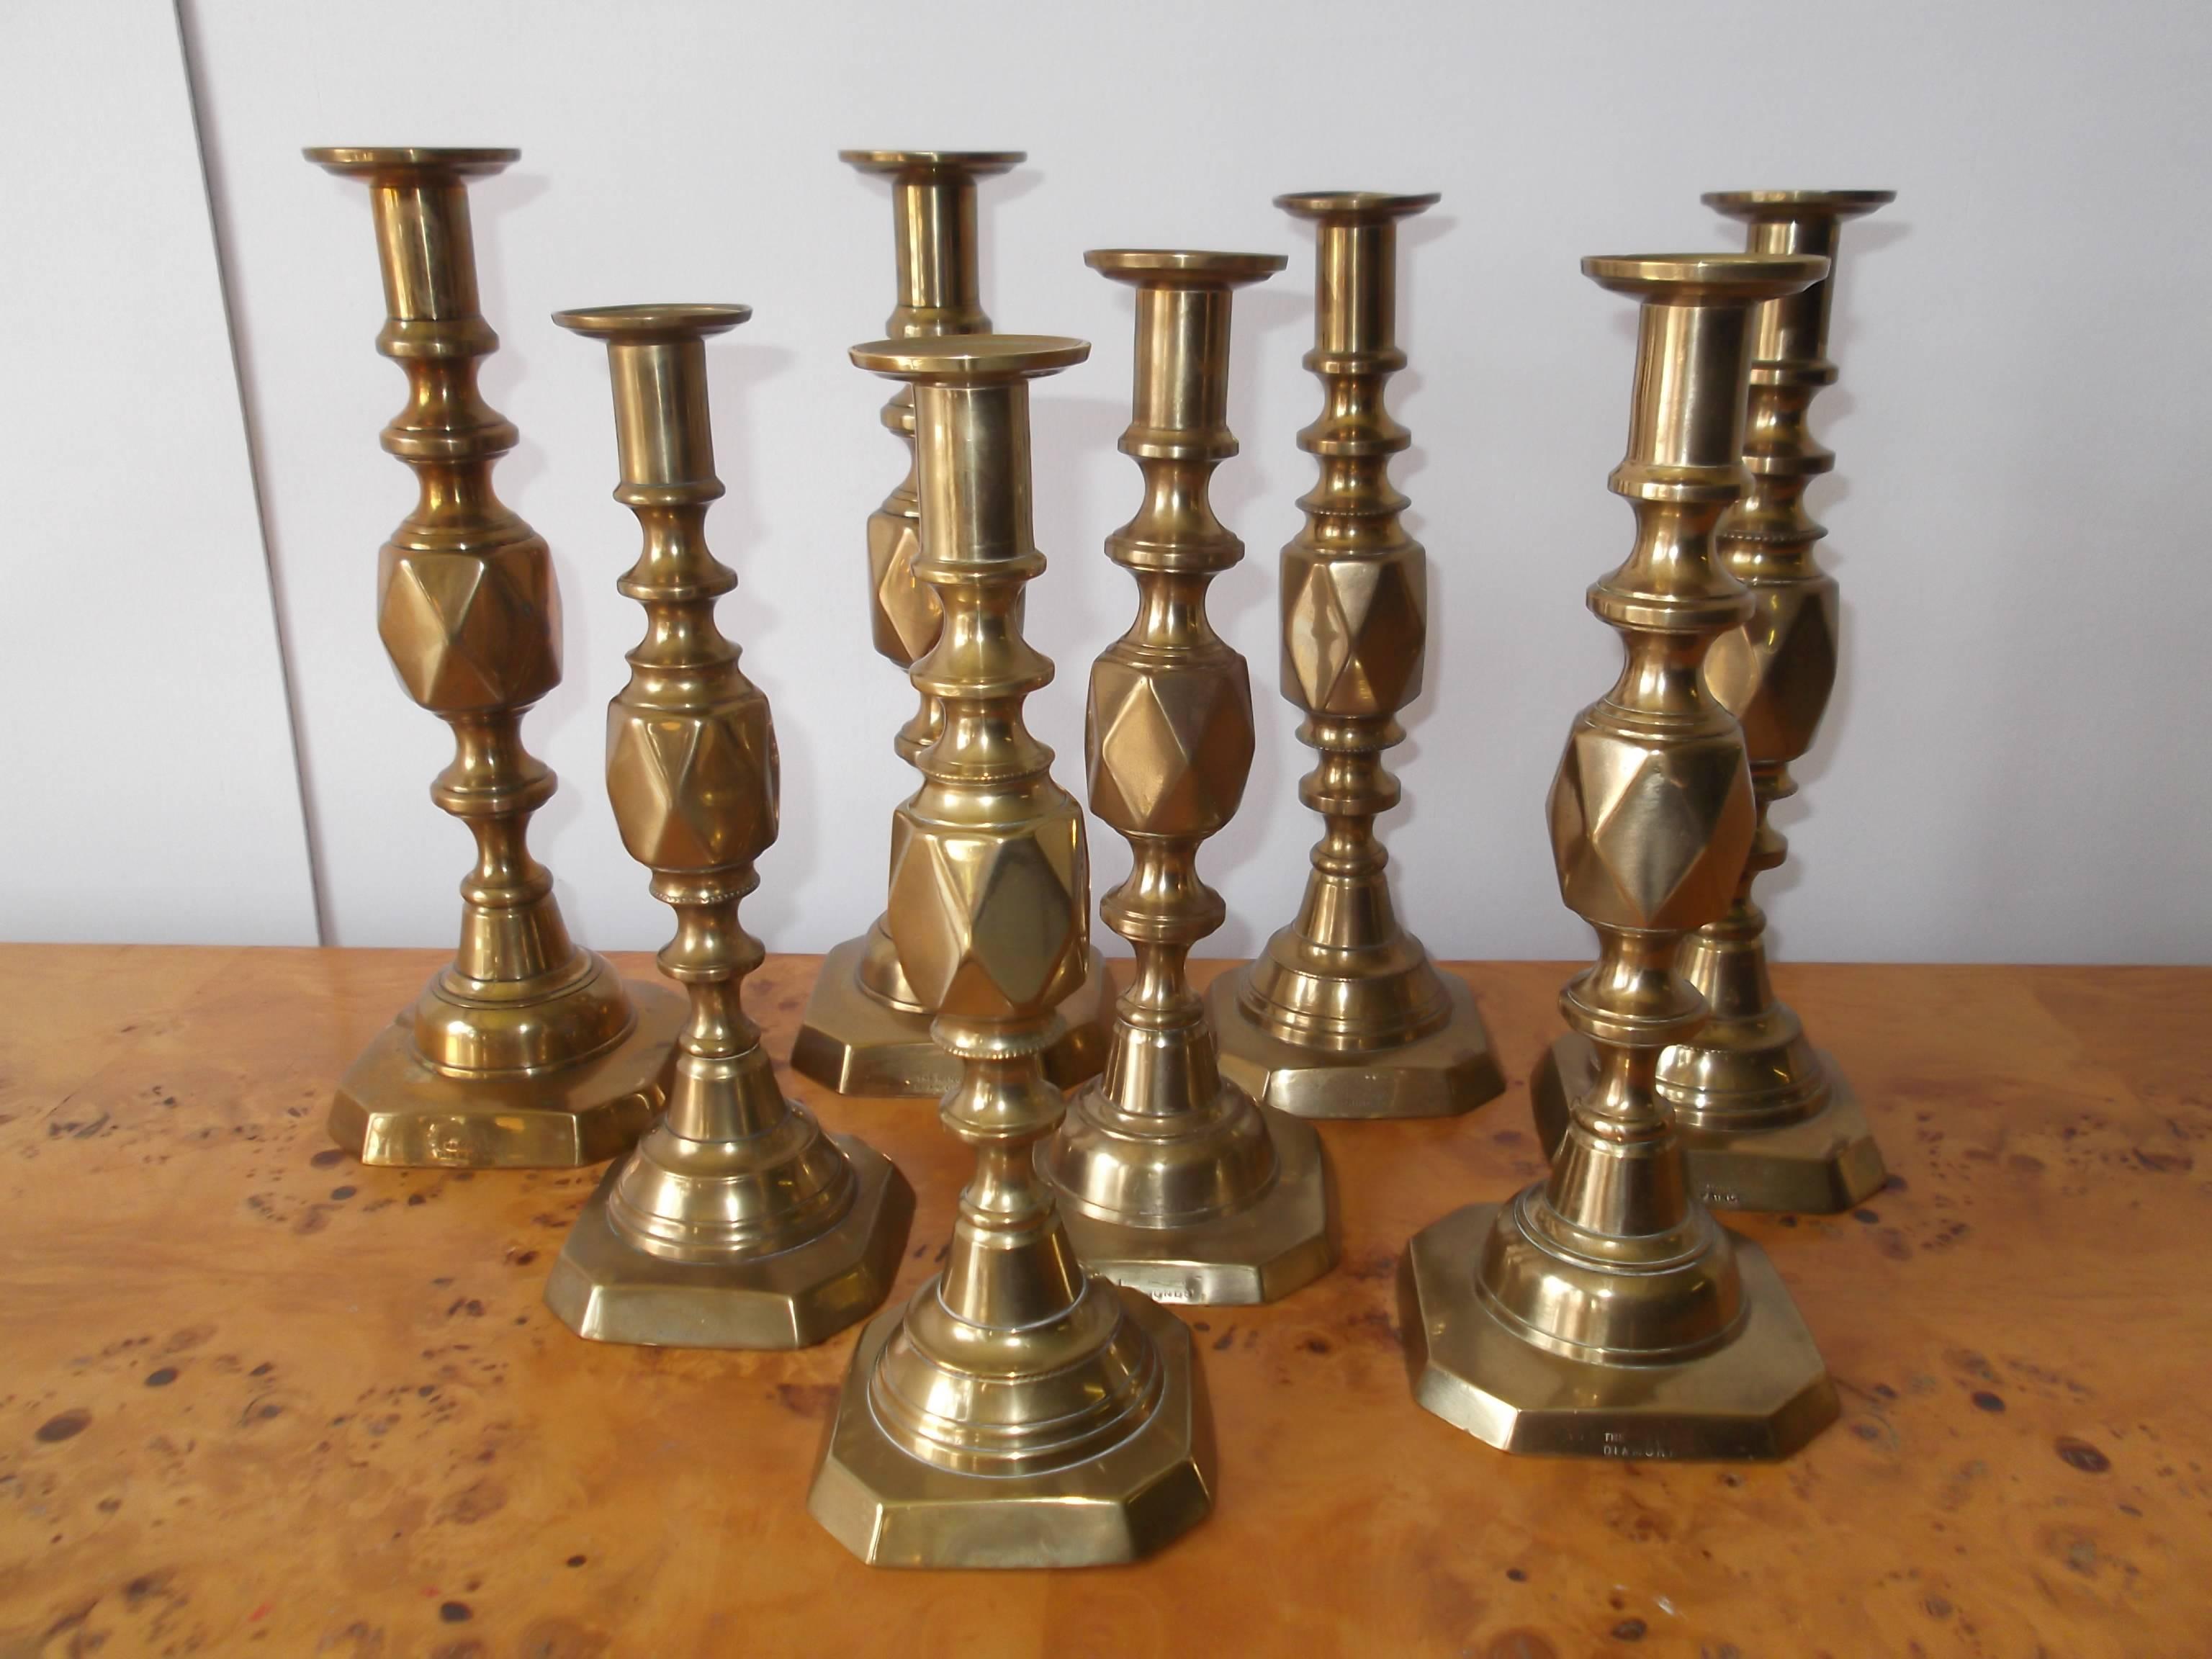 Set of 8! This is a wonderful collection of Antique Brass Push-Up candlesticks. They are from the 1890s celebrating the Queen Victoria Jubilee. The collection is sold together. The pieces are all signed to bases. Included are, 